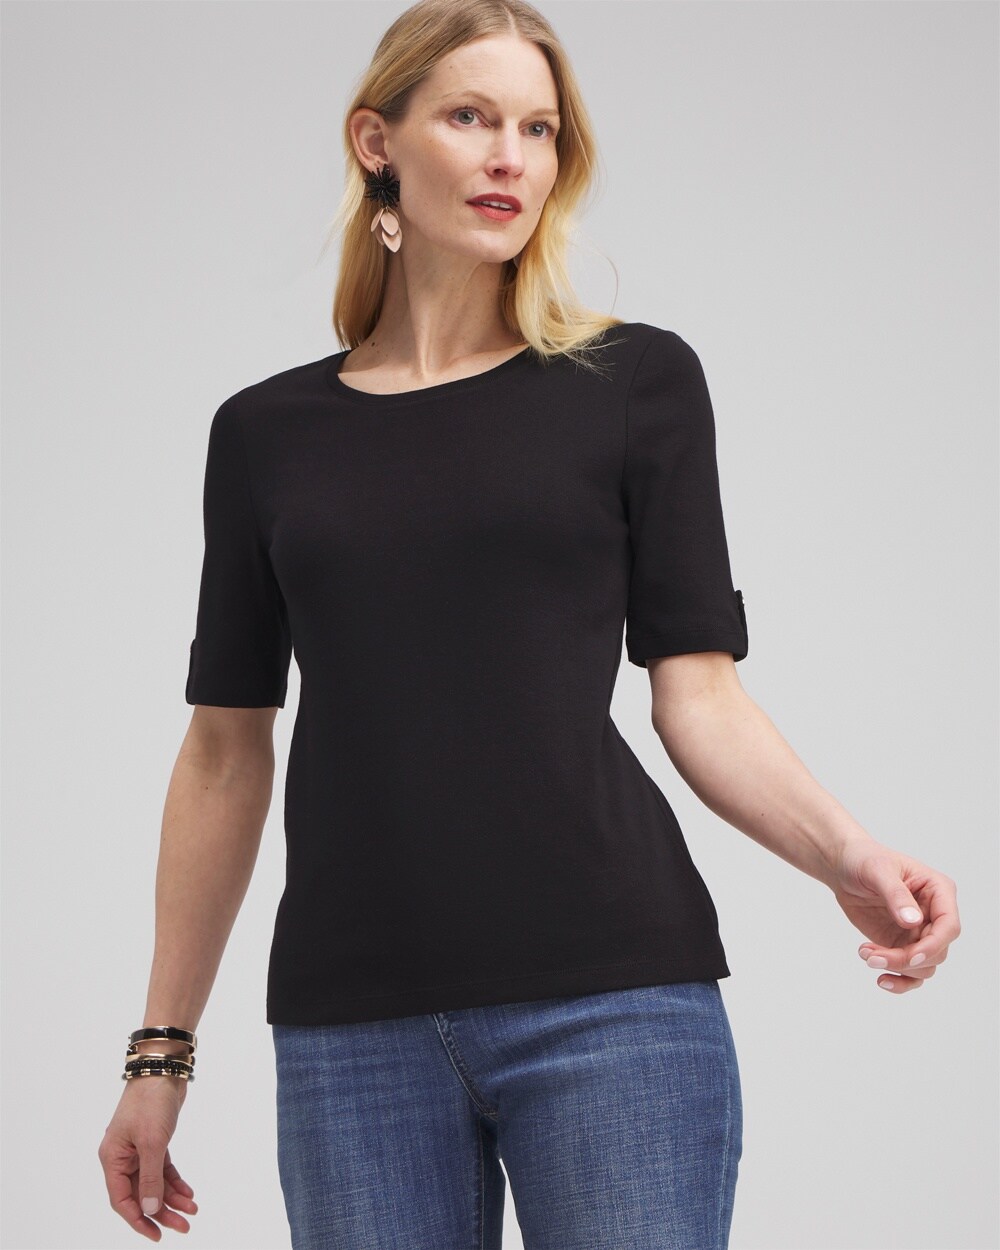 Chico's Elbow Sleeve Cotton Tee In Black Size 4/6 |